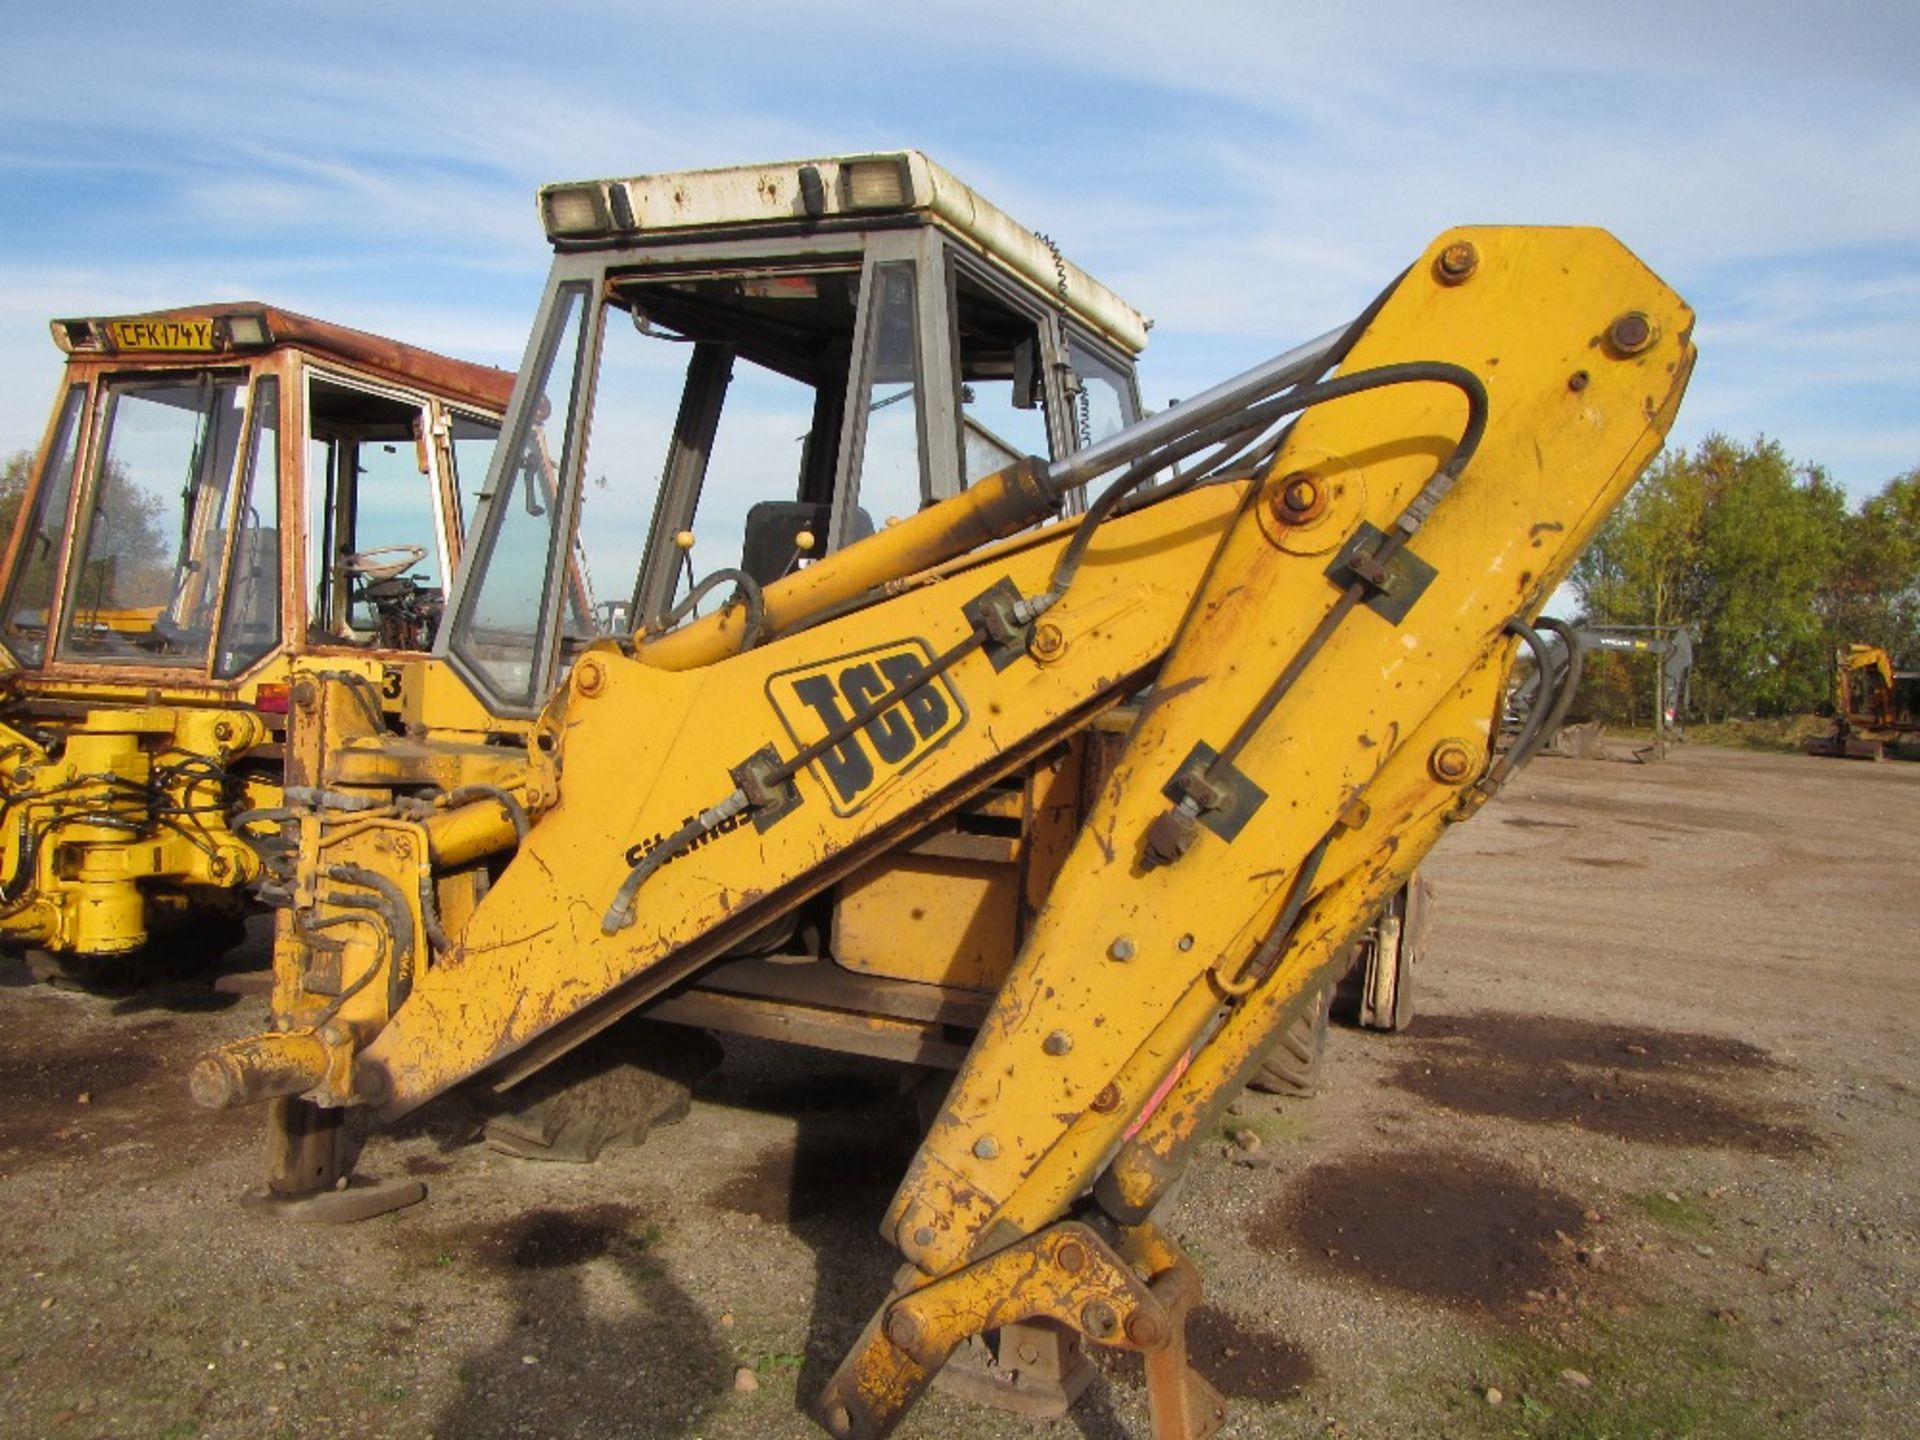 JCB 3CX Project 7 Digger Loader. Gray Cab, 5 Stud Rear Axle, Full set of Rear Buckets, 4 in 1 Dig - Image 4 of 4